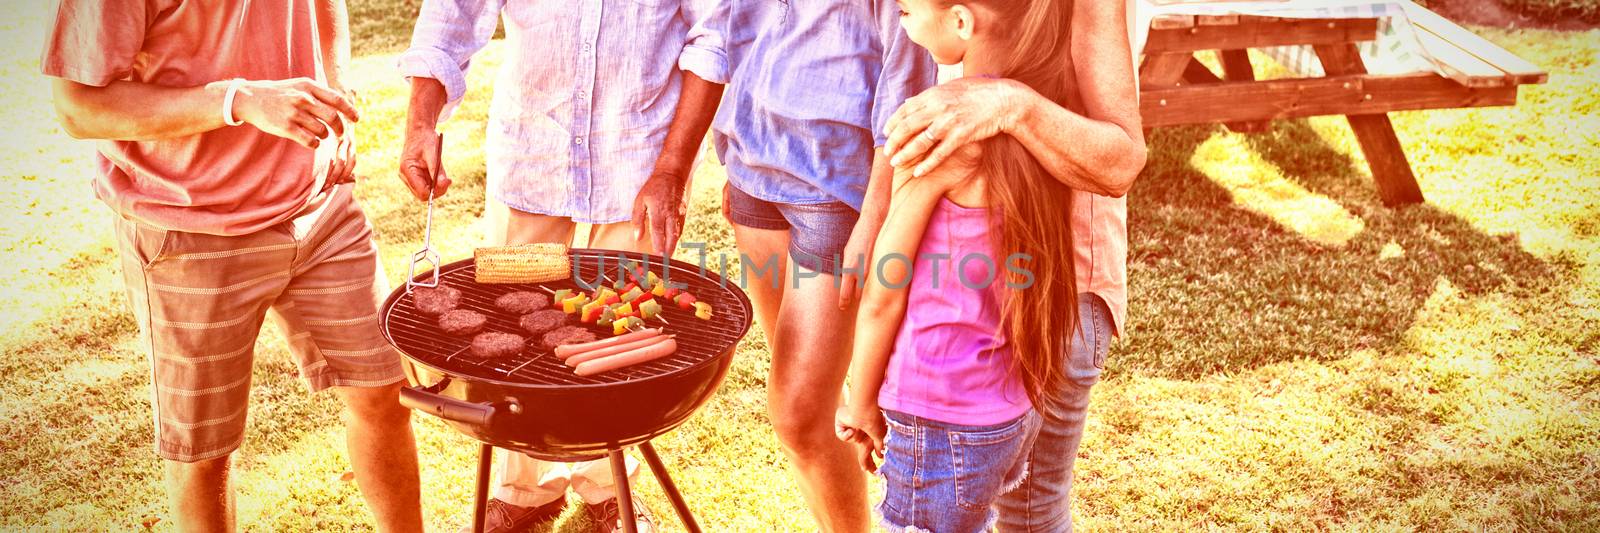 Family talking while preparing barbecue in the park on a sunny day